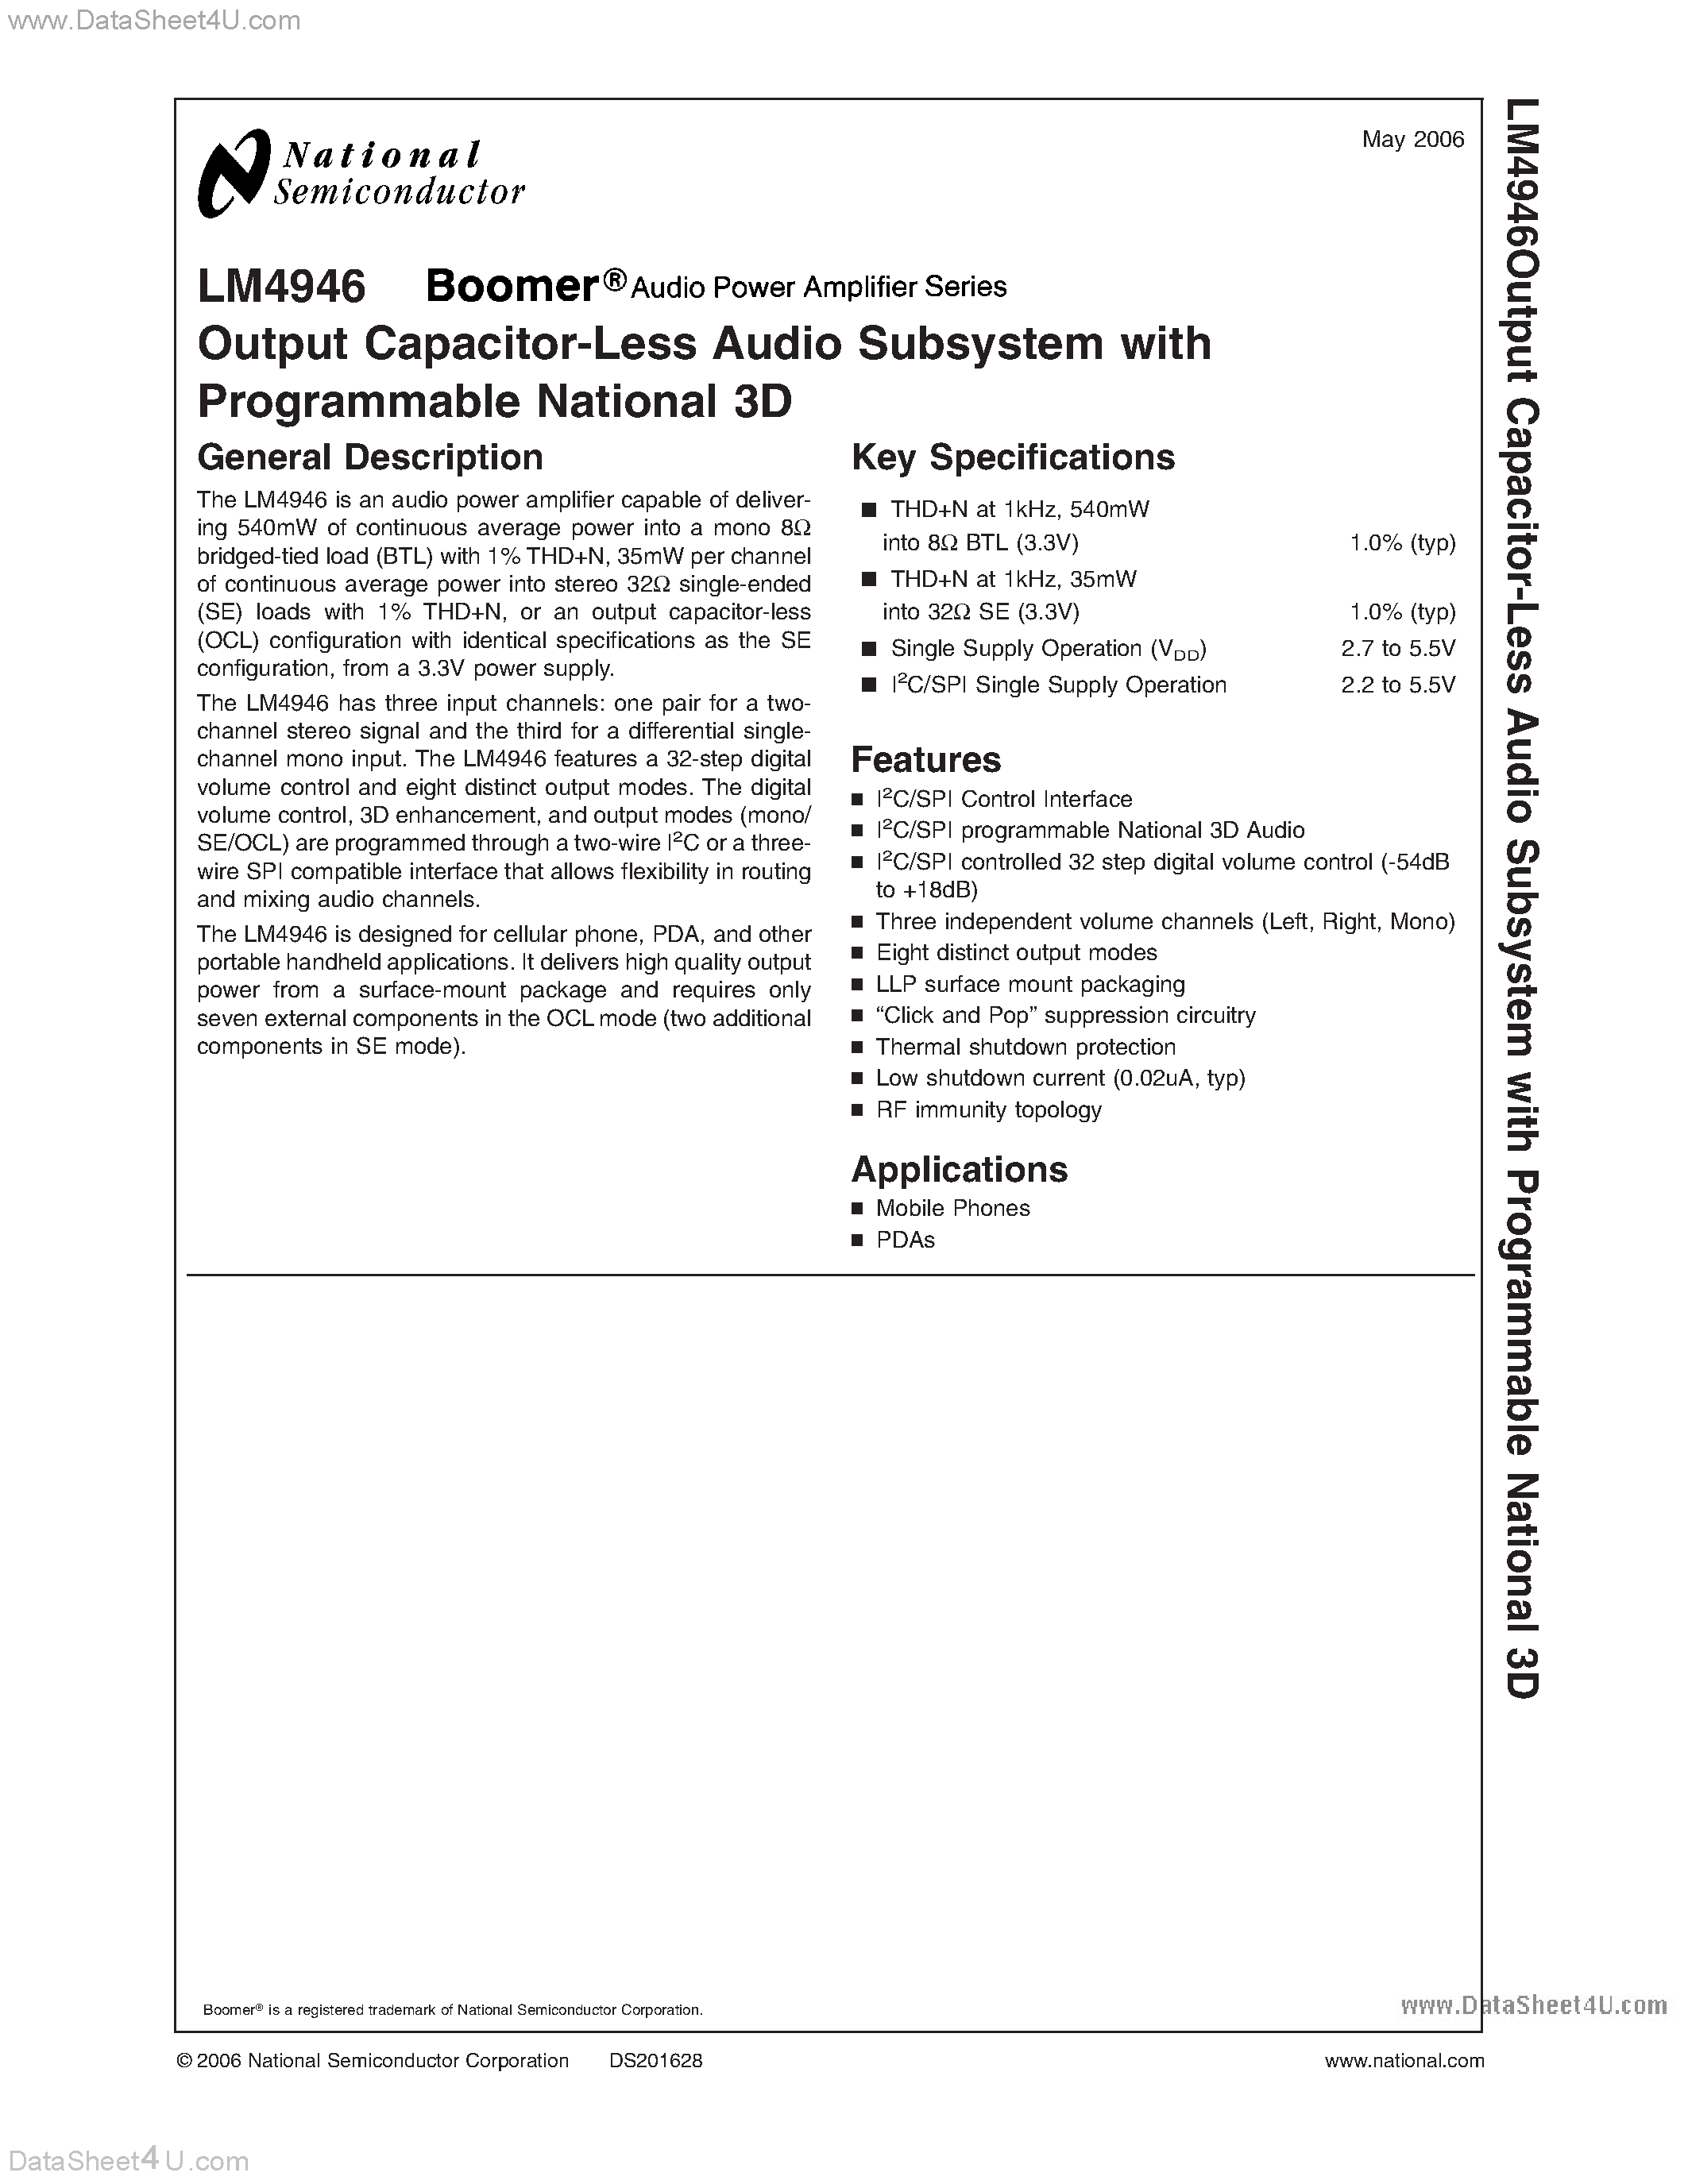 Даташит LM4946 - Output Capacitor Less Audio Subsystem страница 1